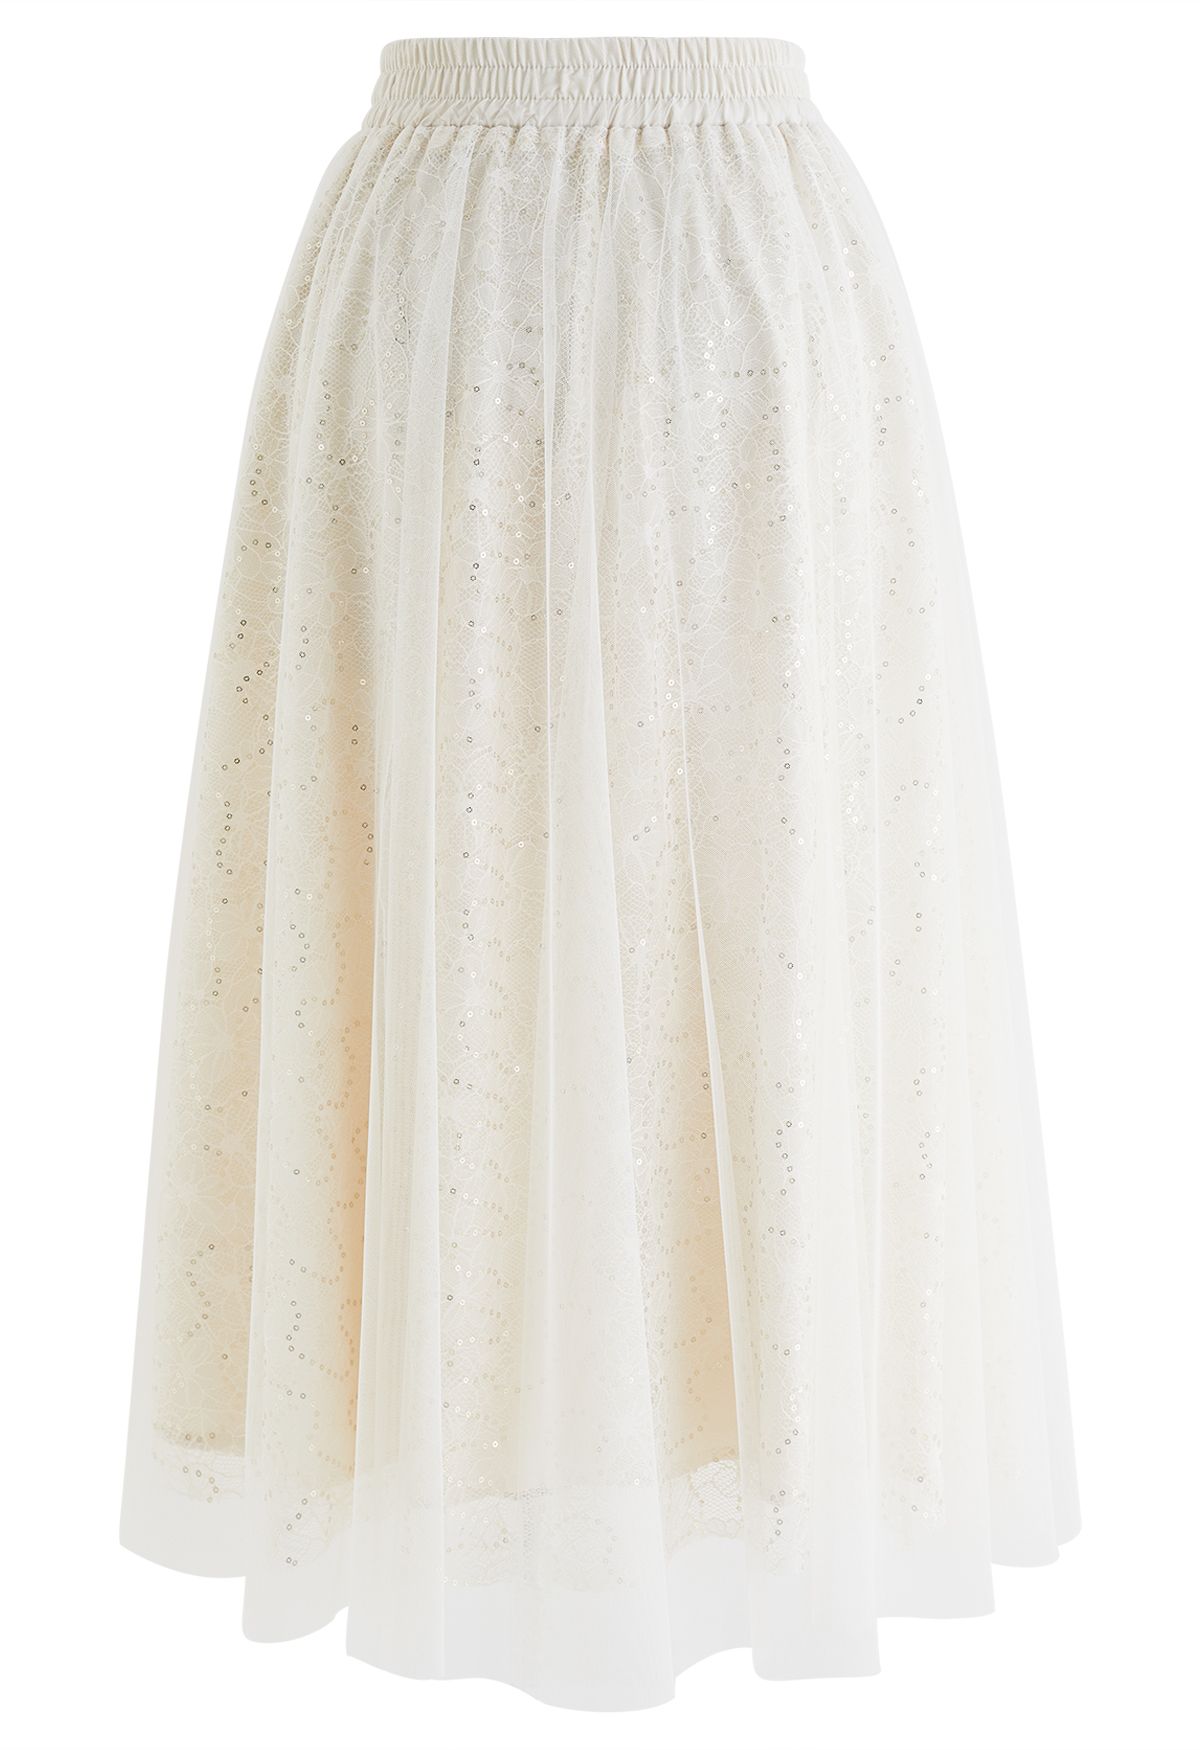 Sequined Floral Lace Mesh Tulle Skirt in Cream